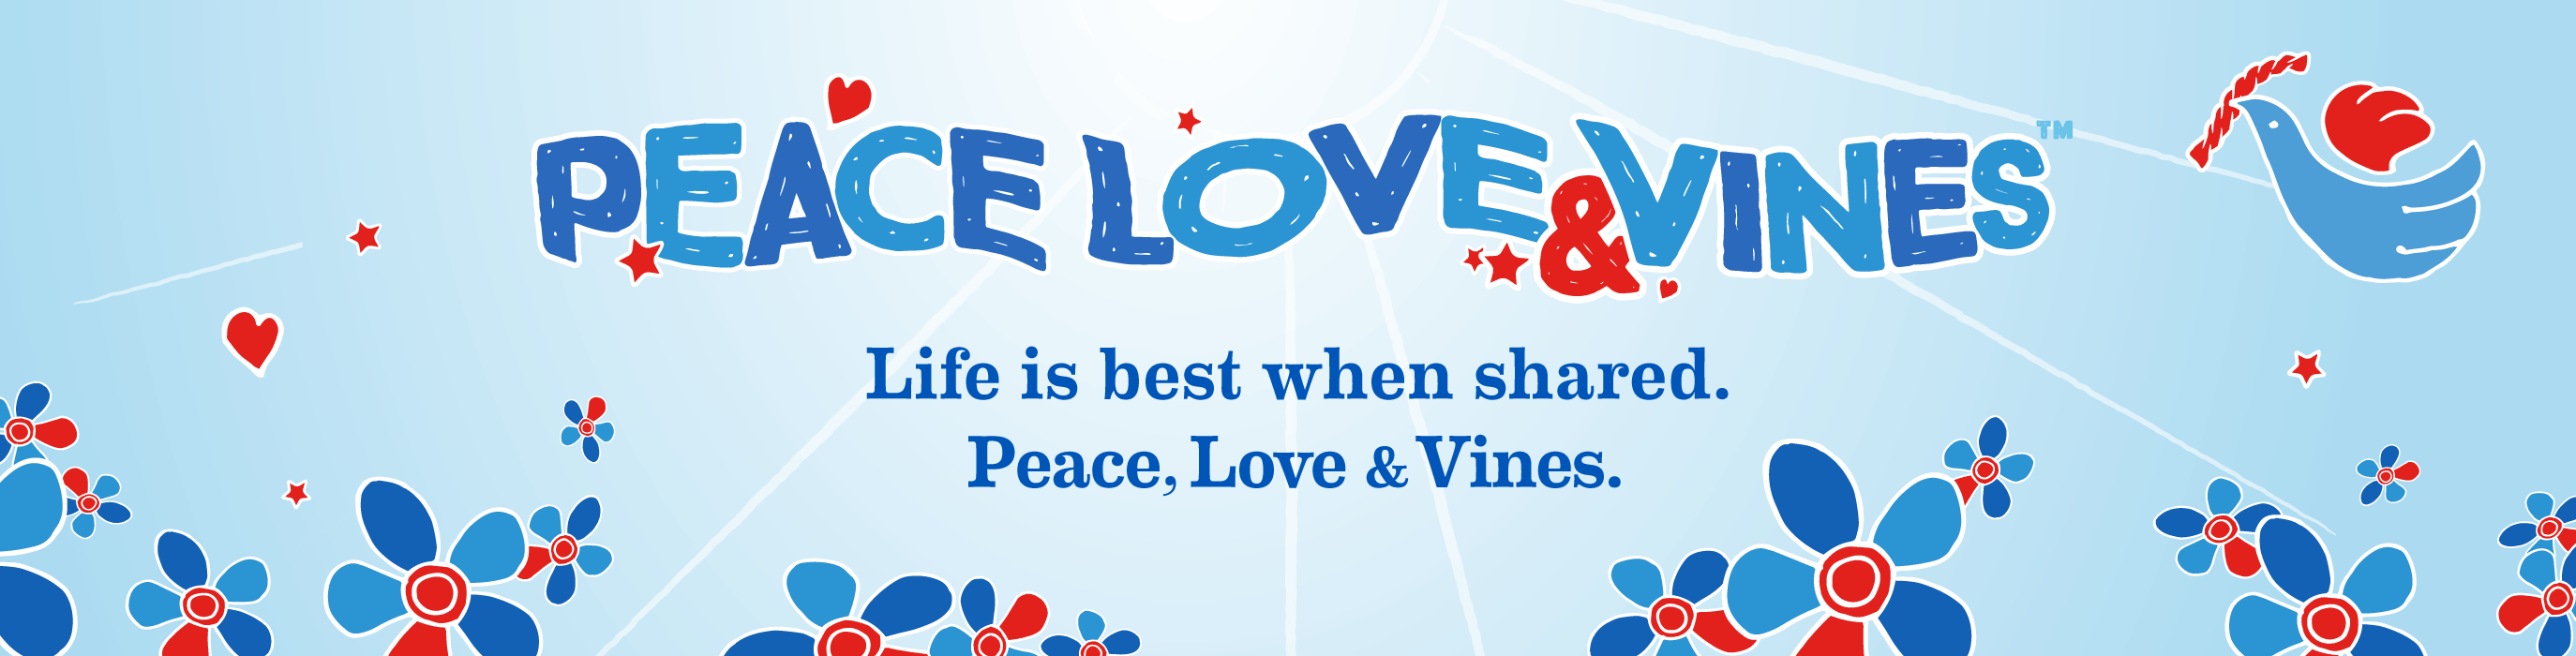 Peace, Love & Vines: Life is best when it's shared